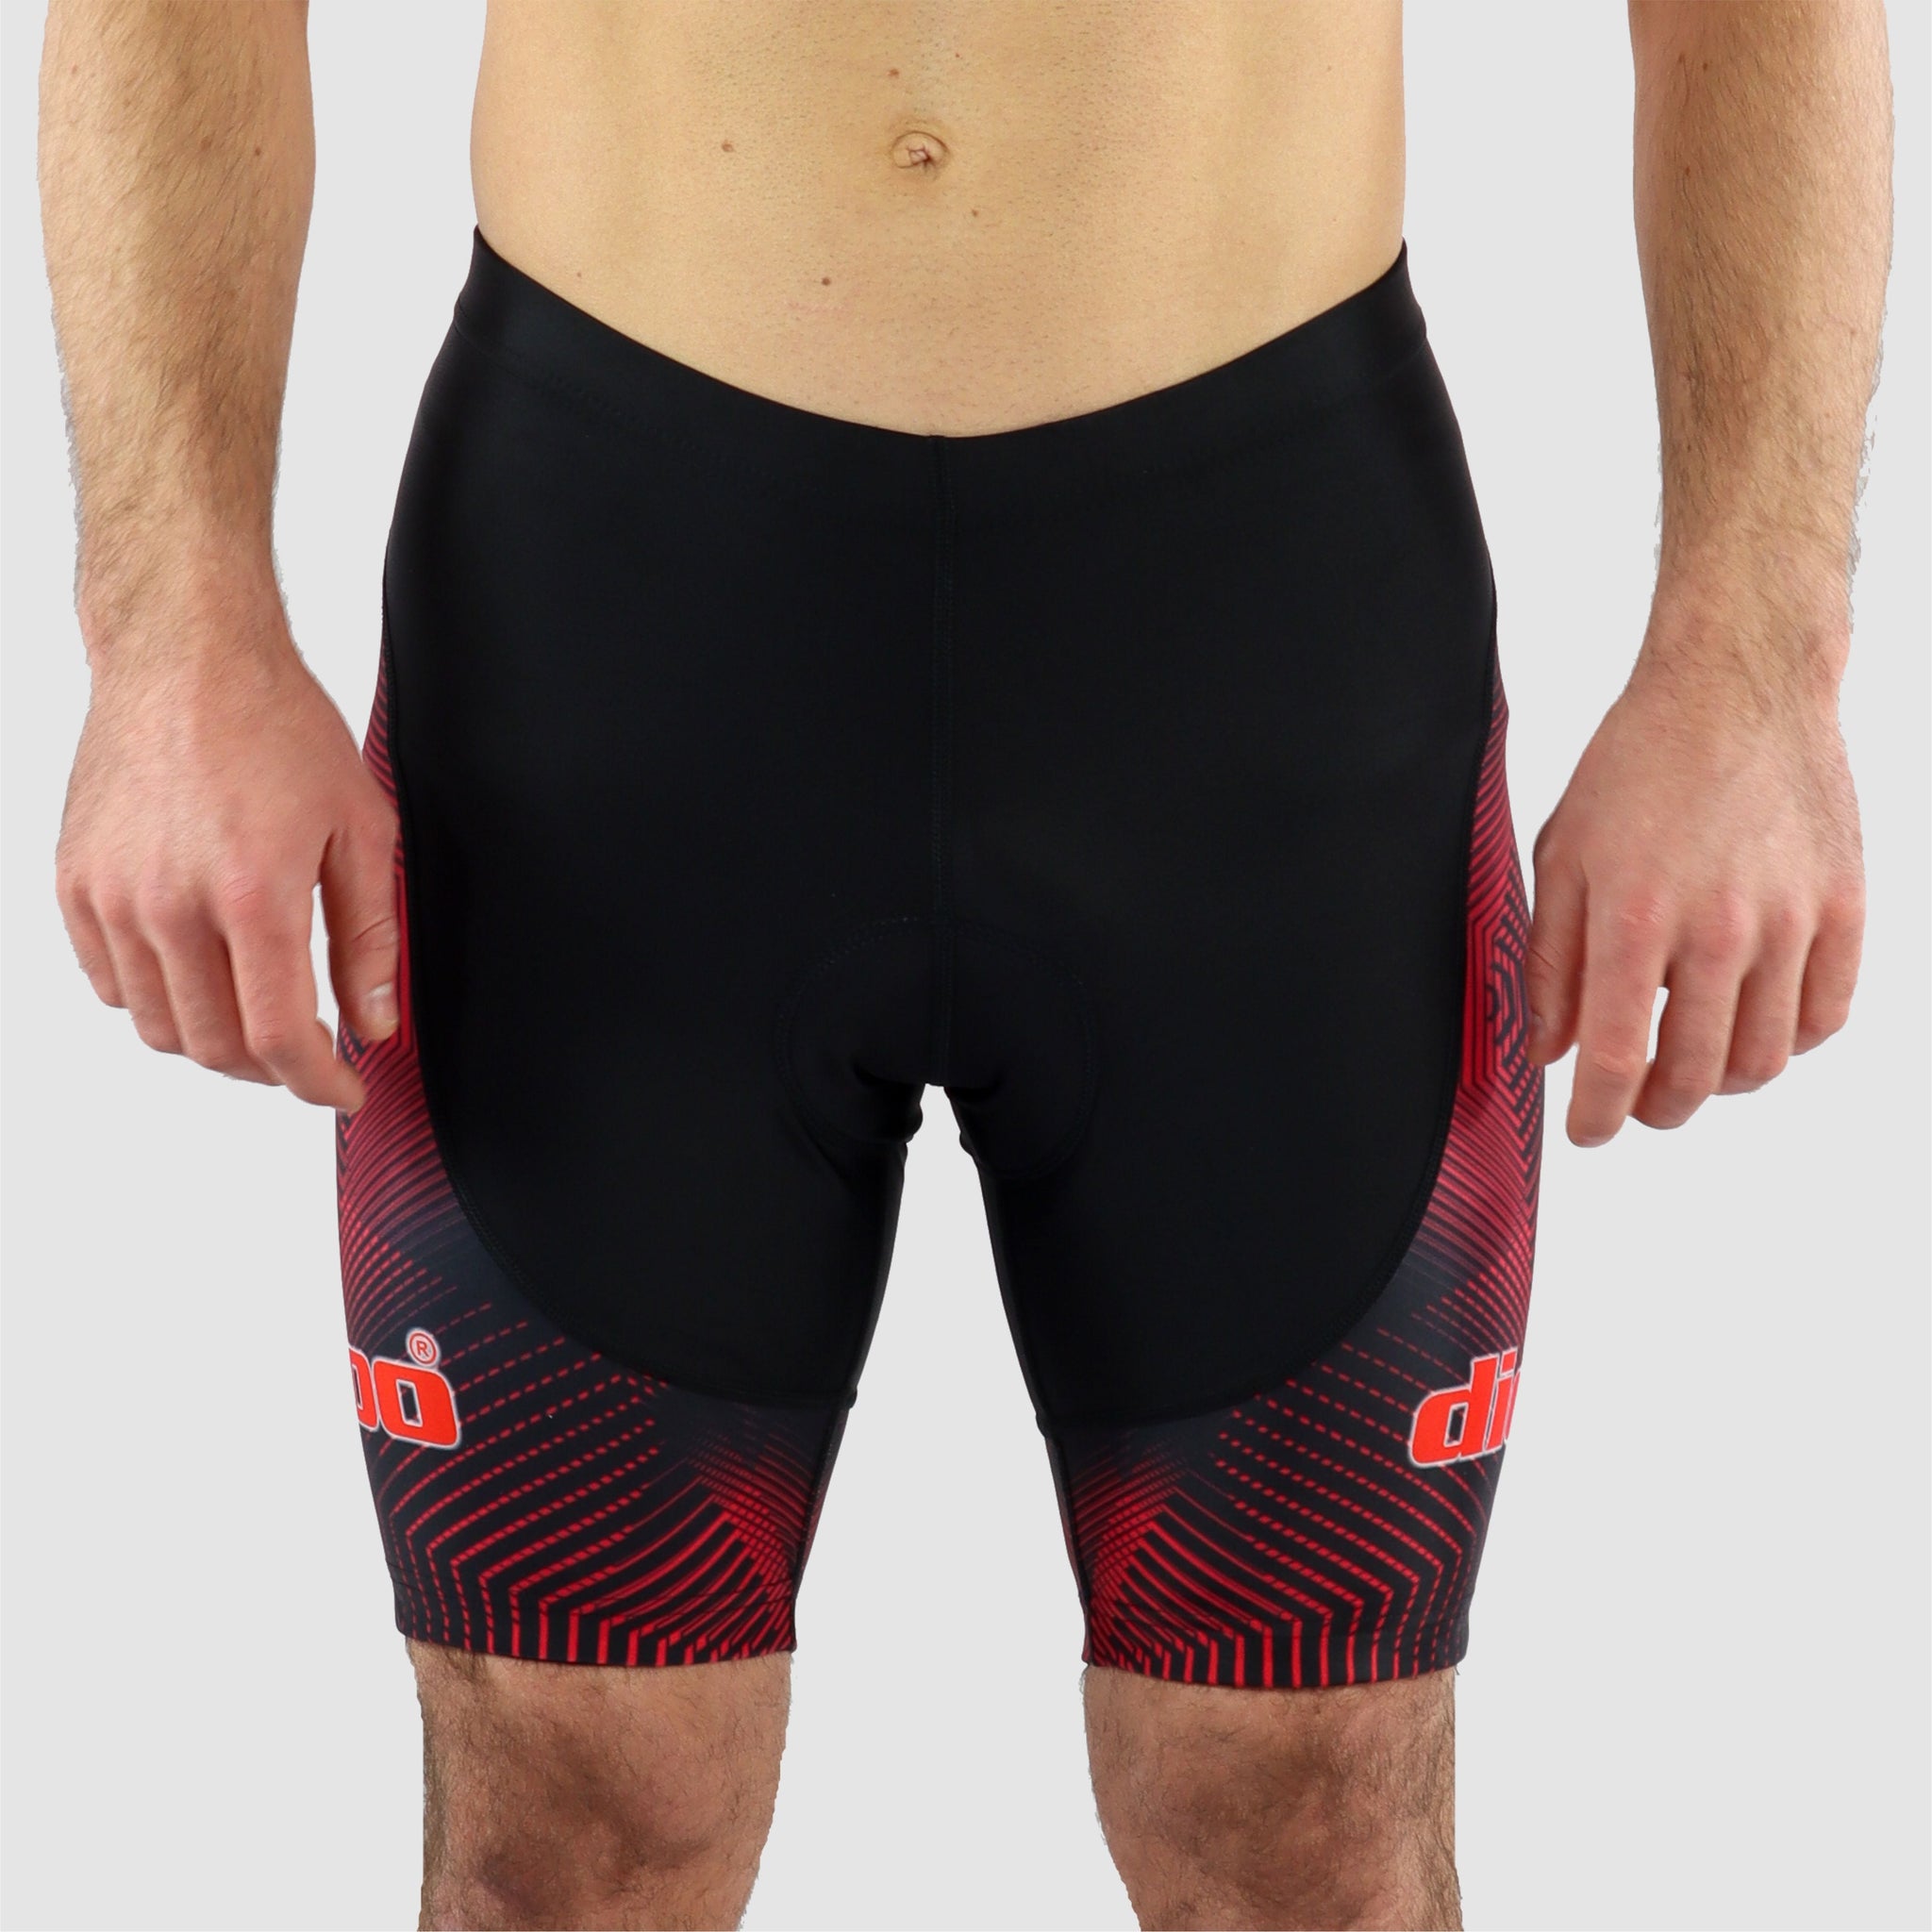 DiDOO Men's Classic Quick Dry Padded Cycling Shorts Black and Red